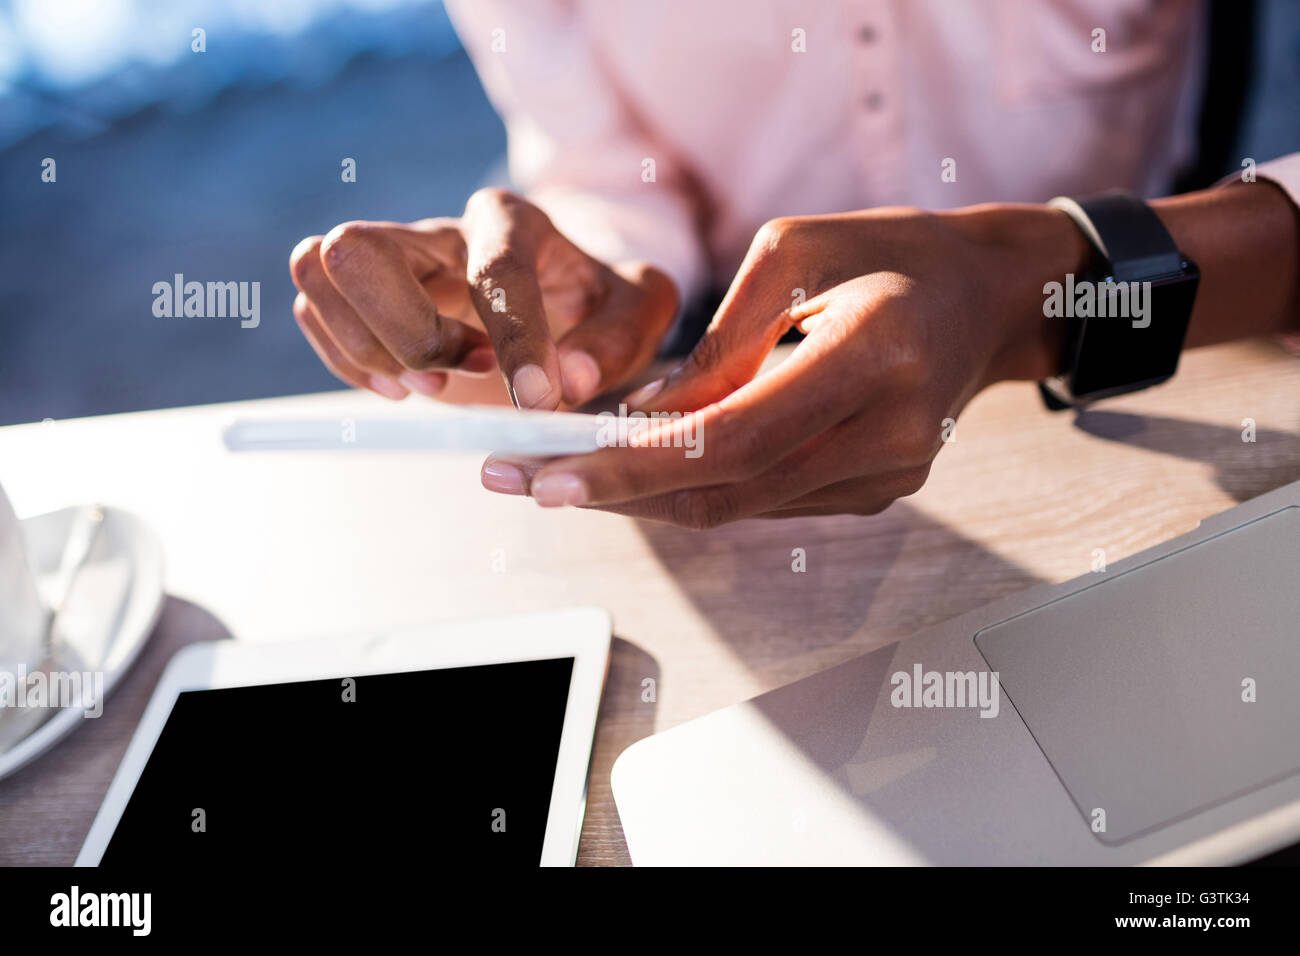 Business people using a smartphone Stock Photo